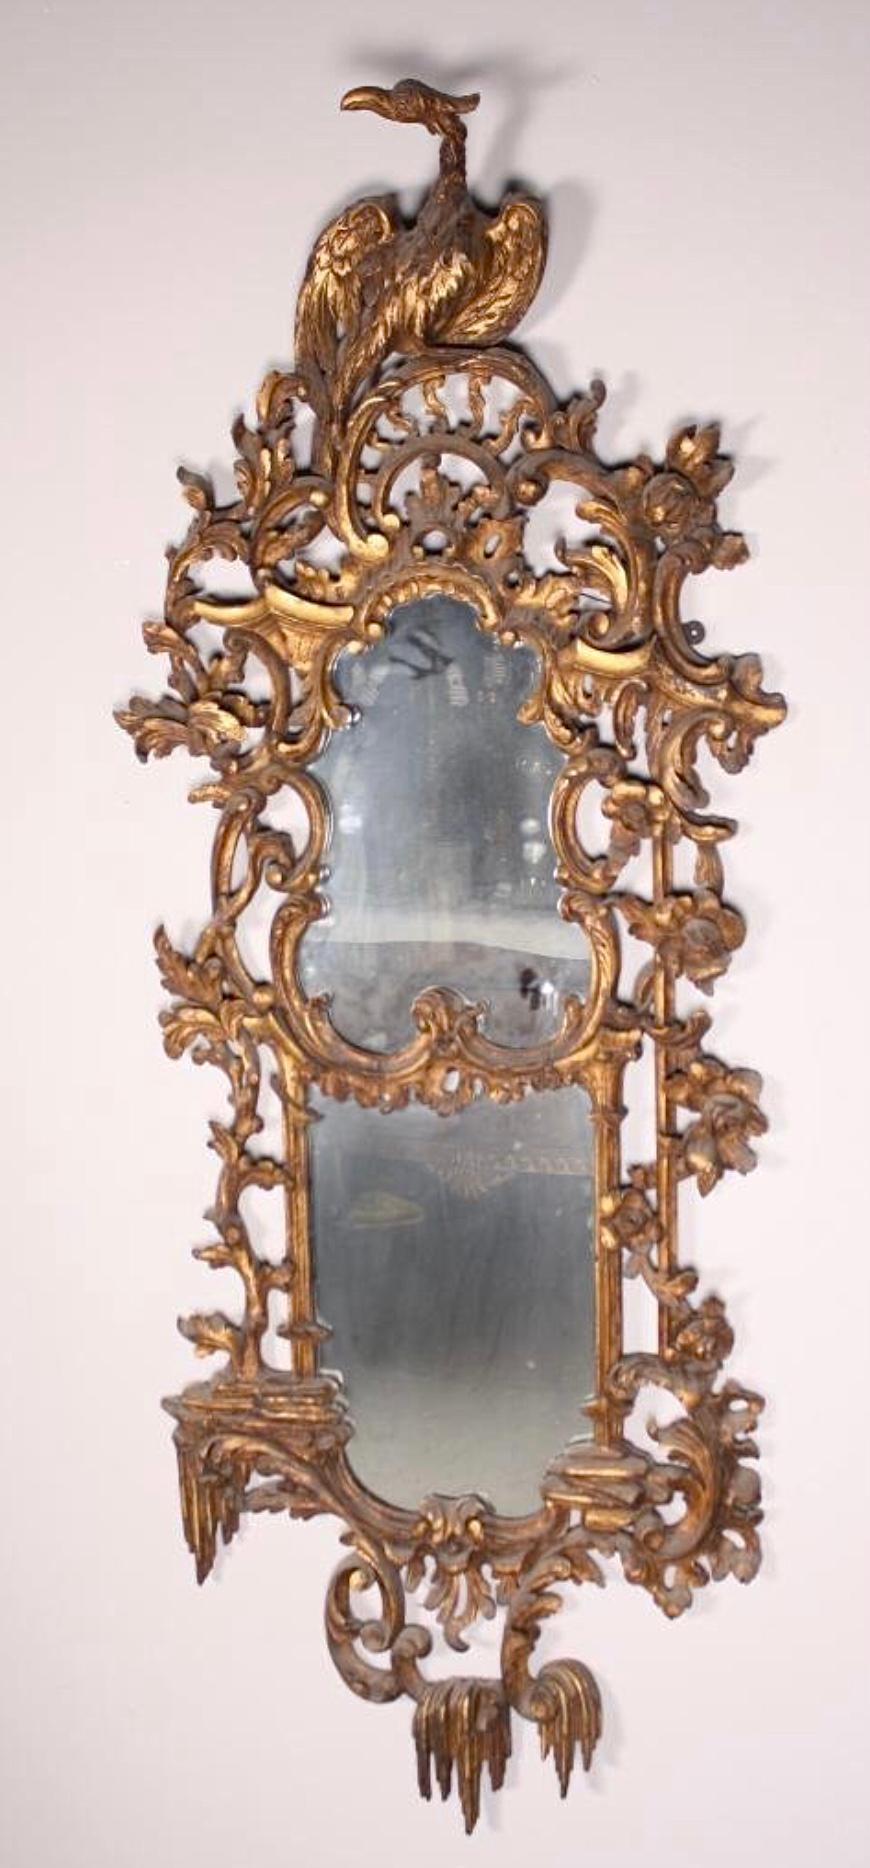 Pair of George III Style Giltwood Pier Mirrors In the manner of Thomas Chippendale.

An exceptional pair of George III style giltwood mirrors, the mirror plate within a carved and molded asymmetrical cartouche frame in the Rococo manner of Thomas